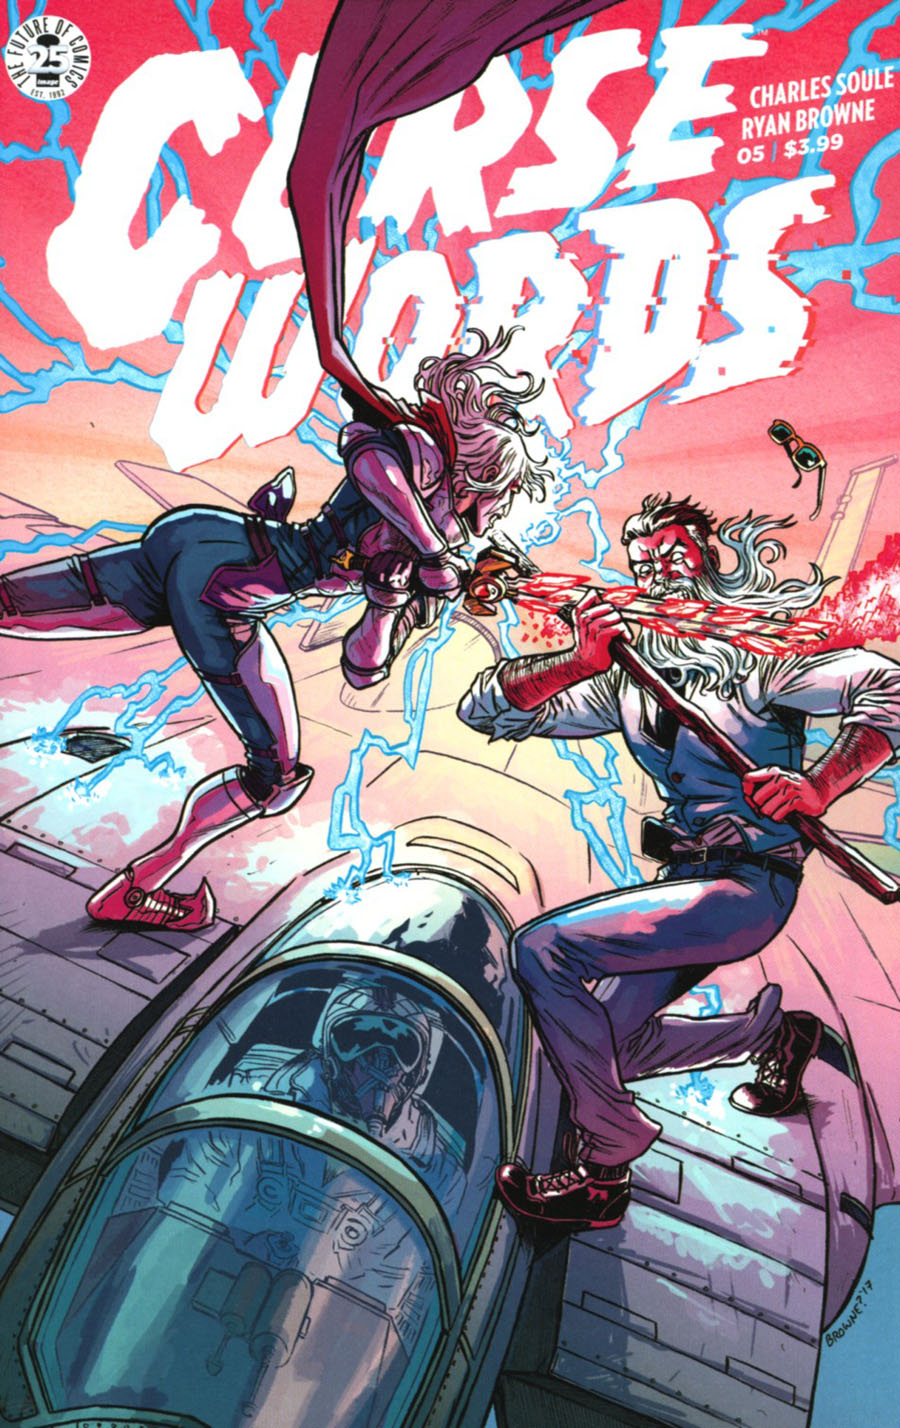 Curse Words #5 Cover A Ryan Browne